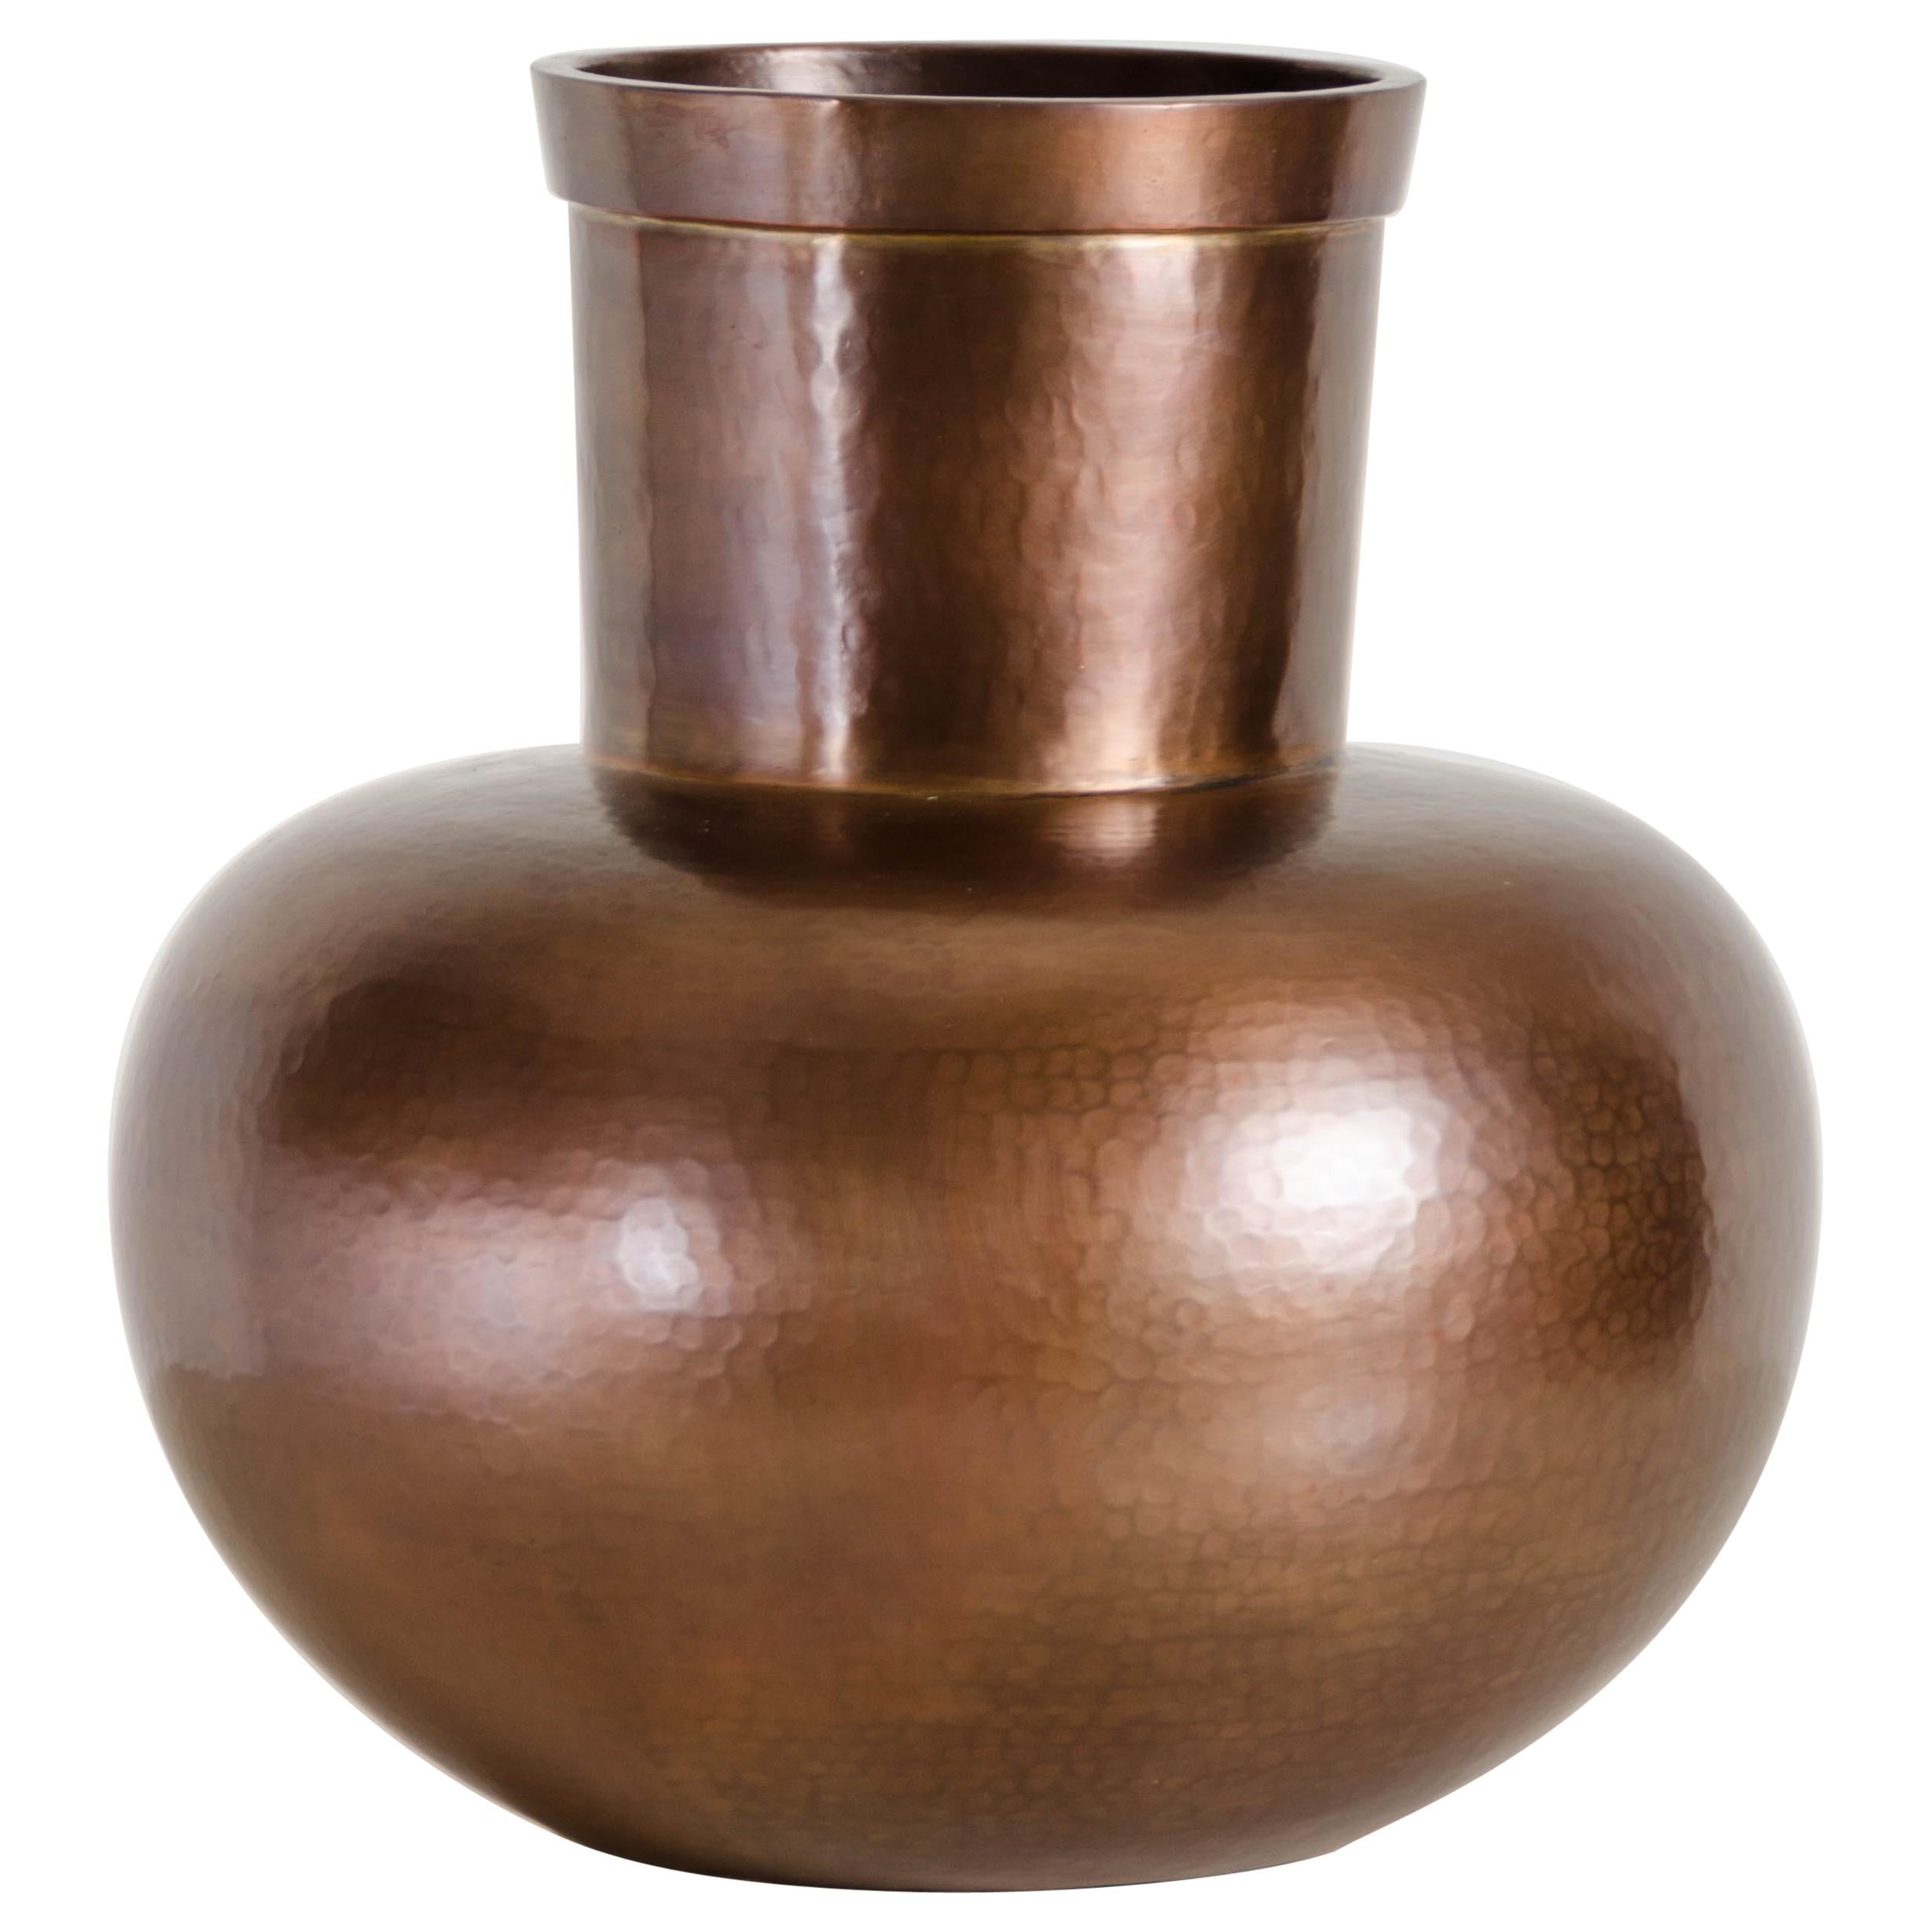 Da Hu Copper Jar, Antique Copper by Robert Kuo, Hand Repoussé, Limited Edition For Sale